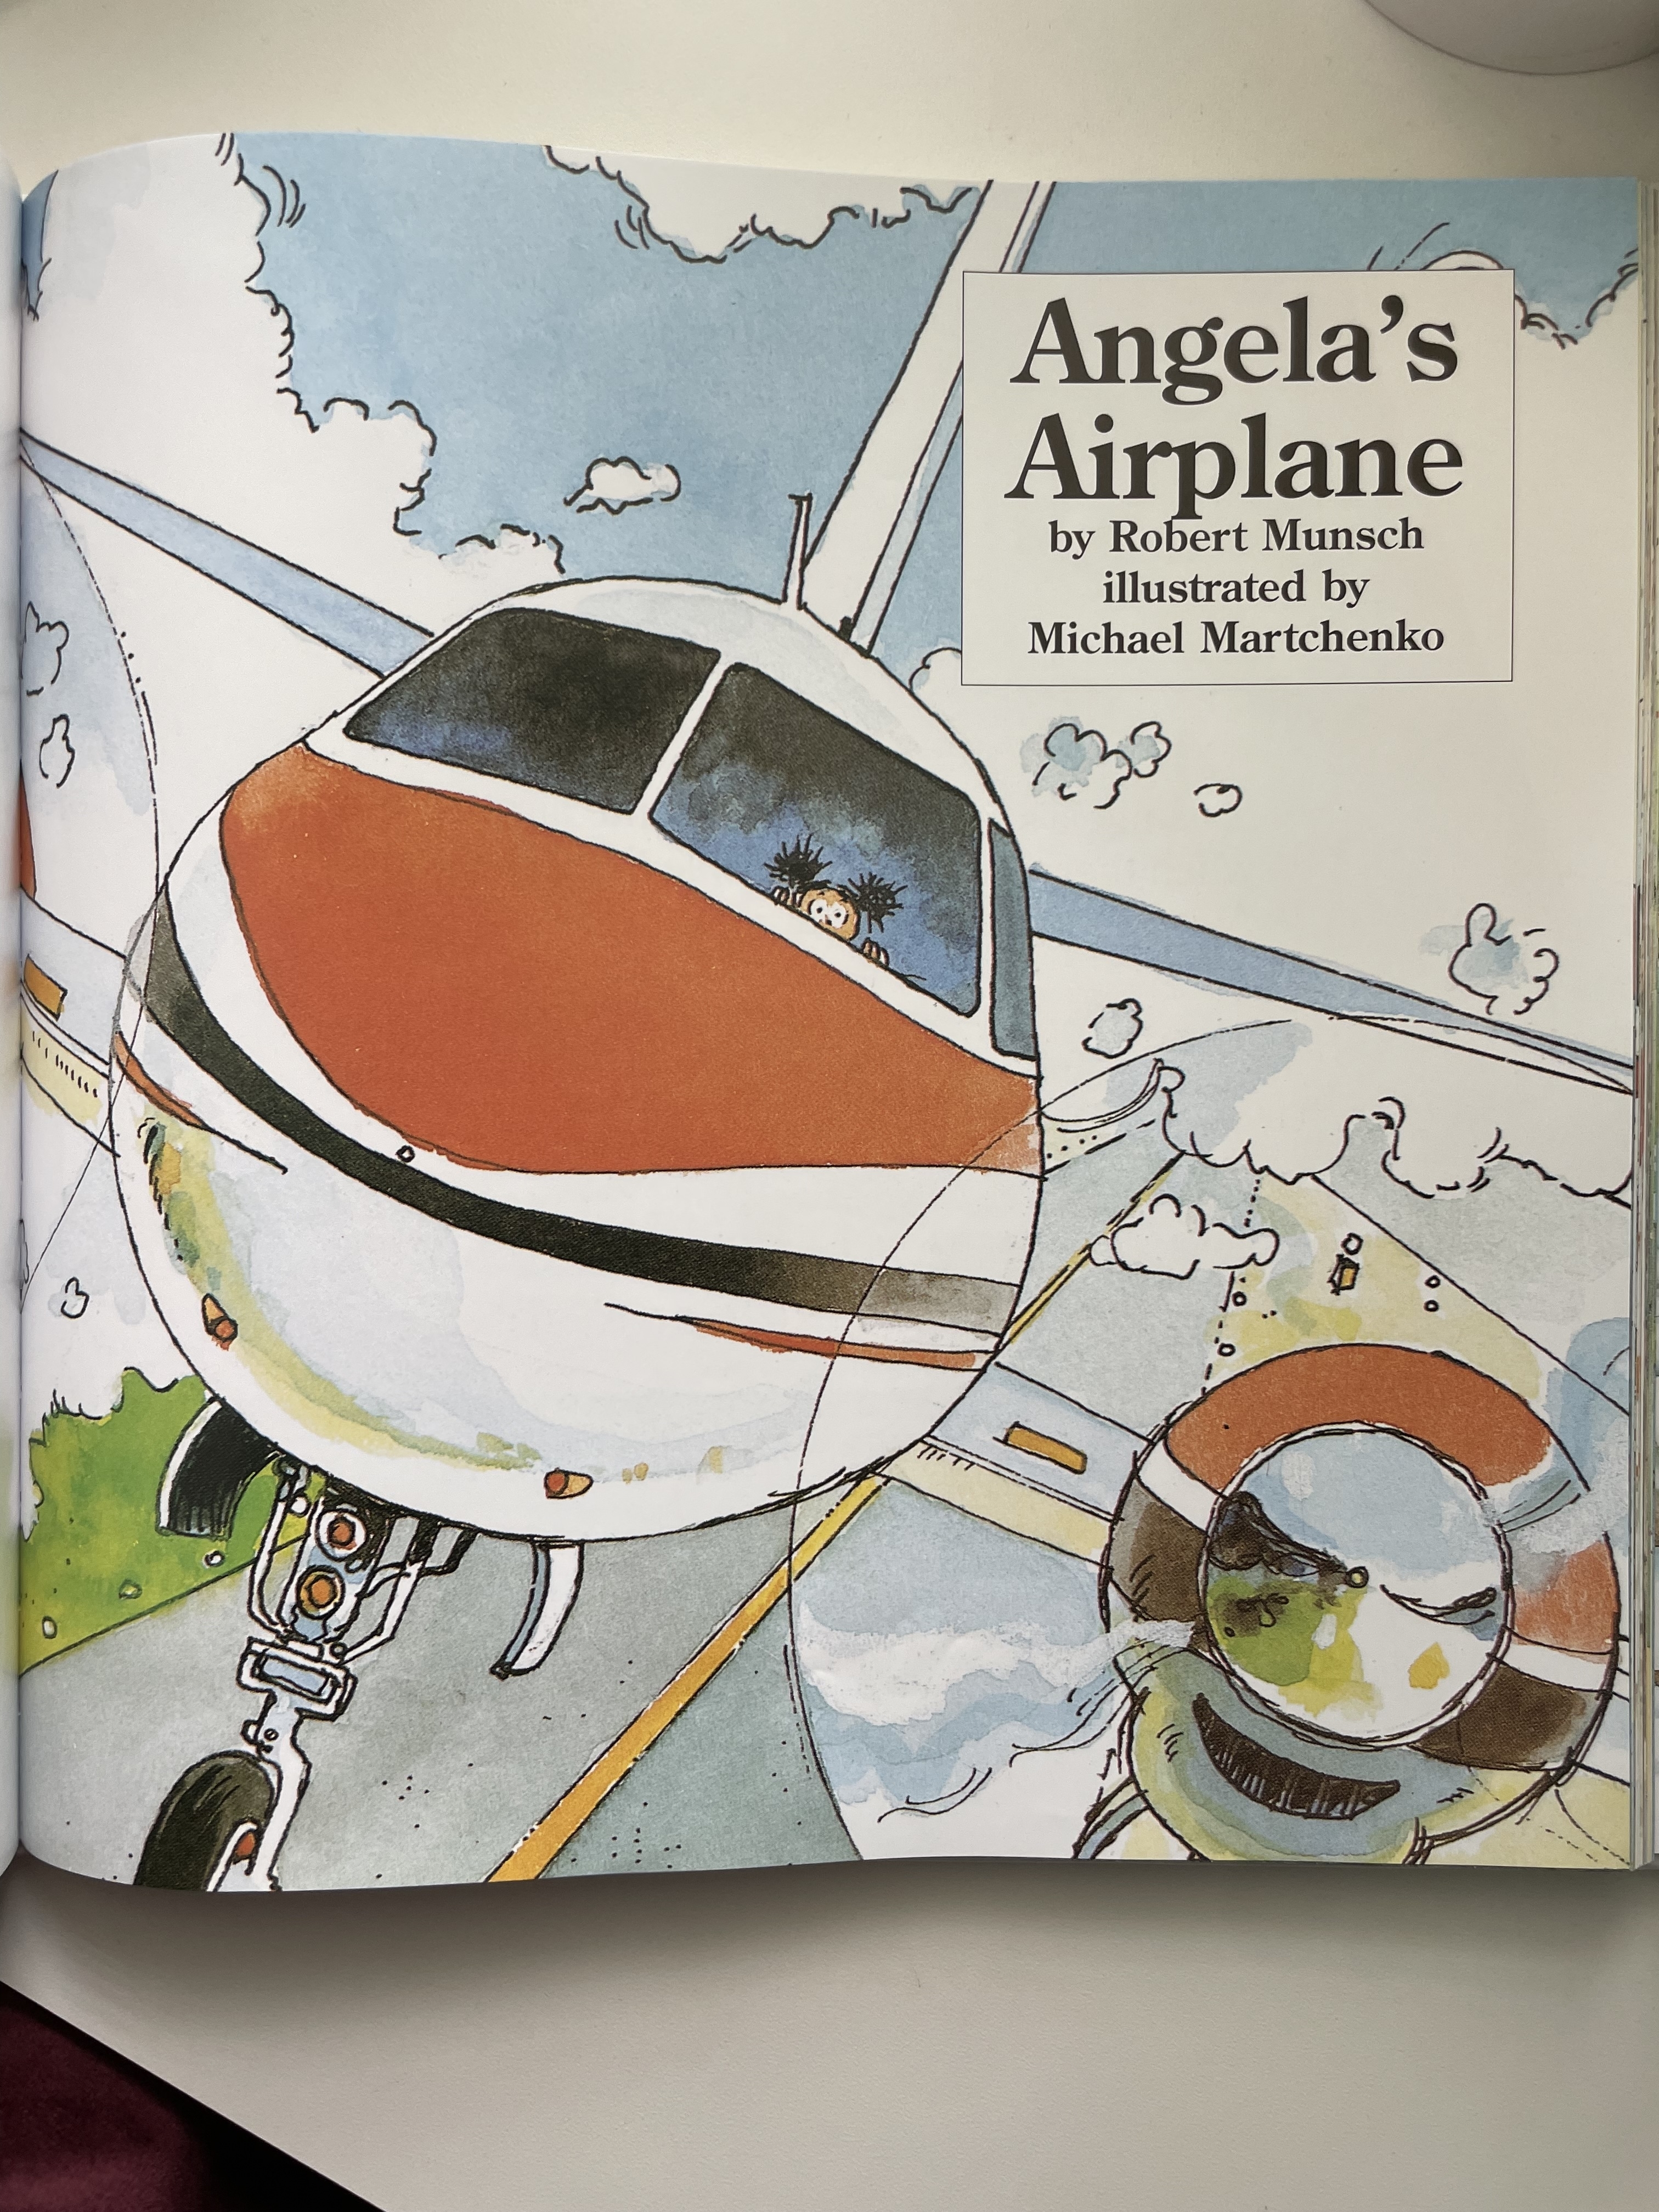 Book page showing title &quot;Angela&#x27;s Airplane&quot; by Robert Munsch, illustrated by Michael Martchenko, with artwork of a plane